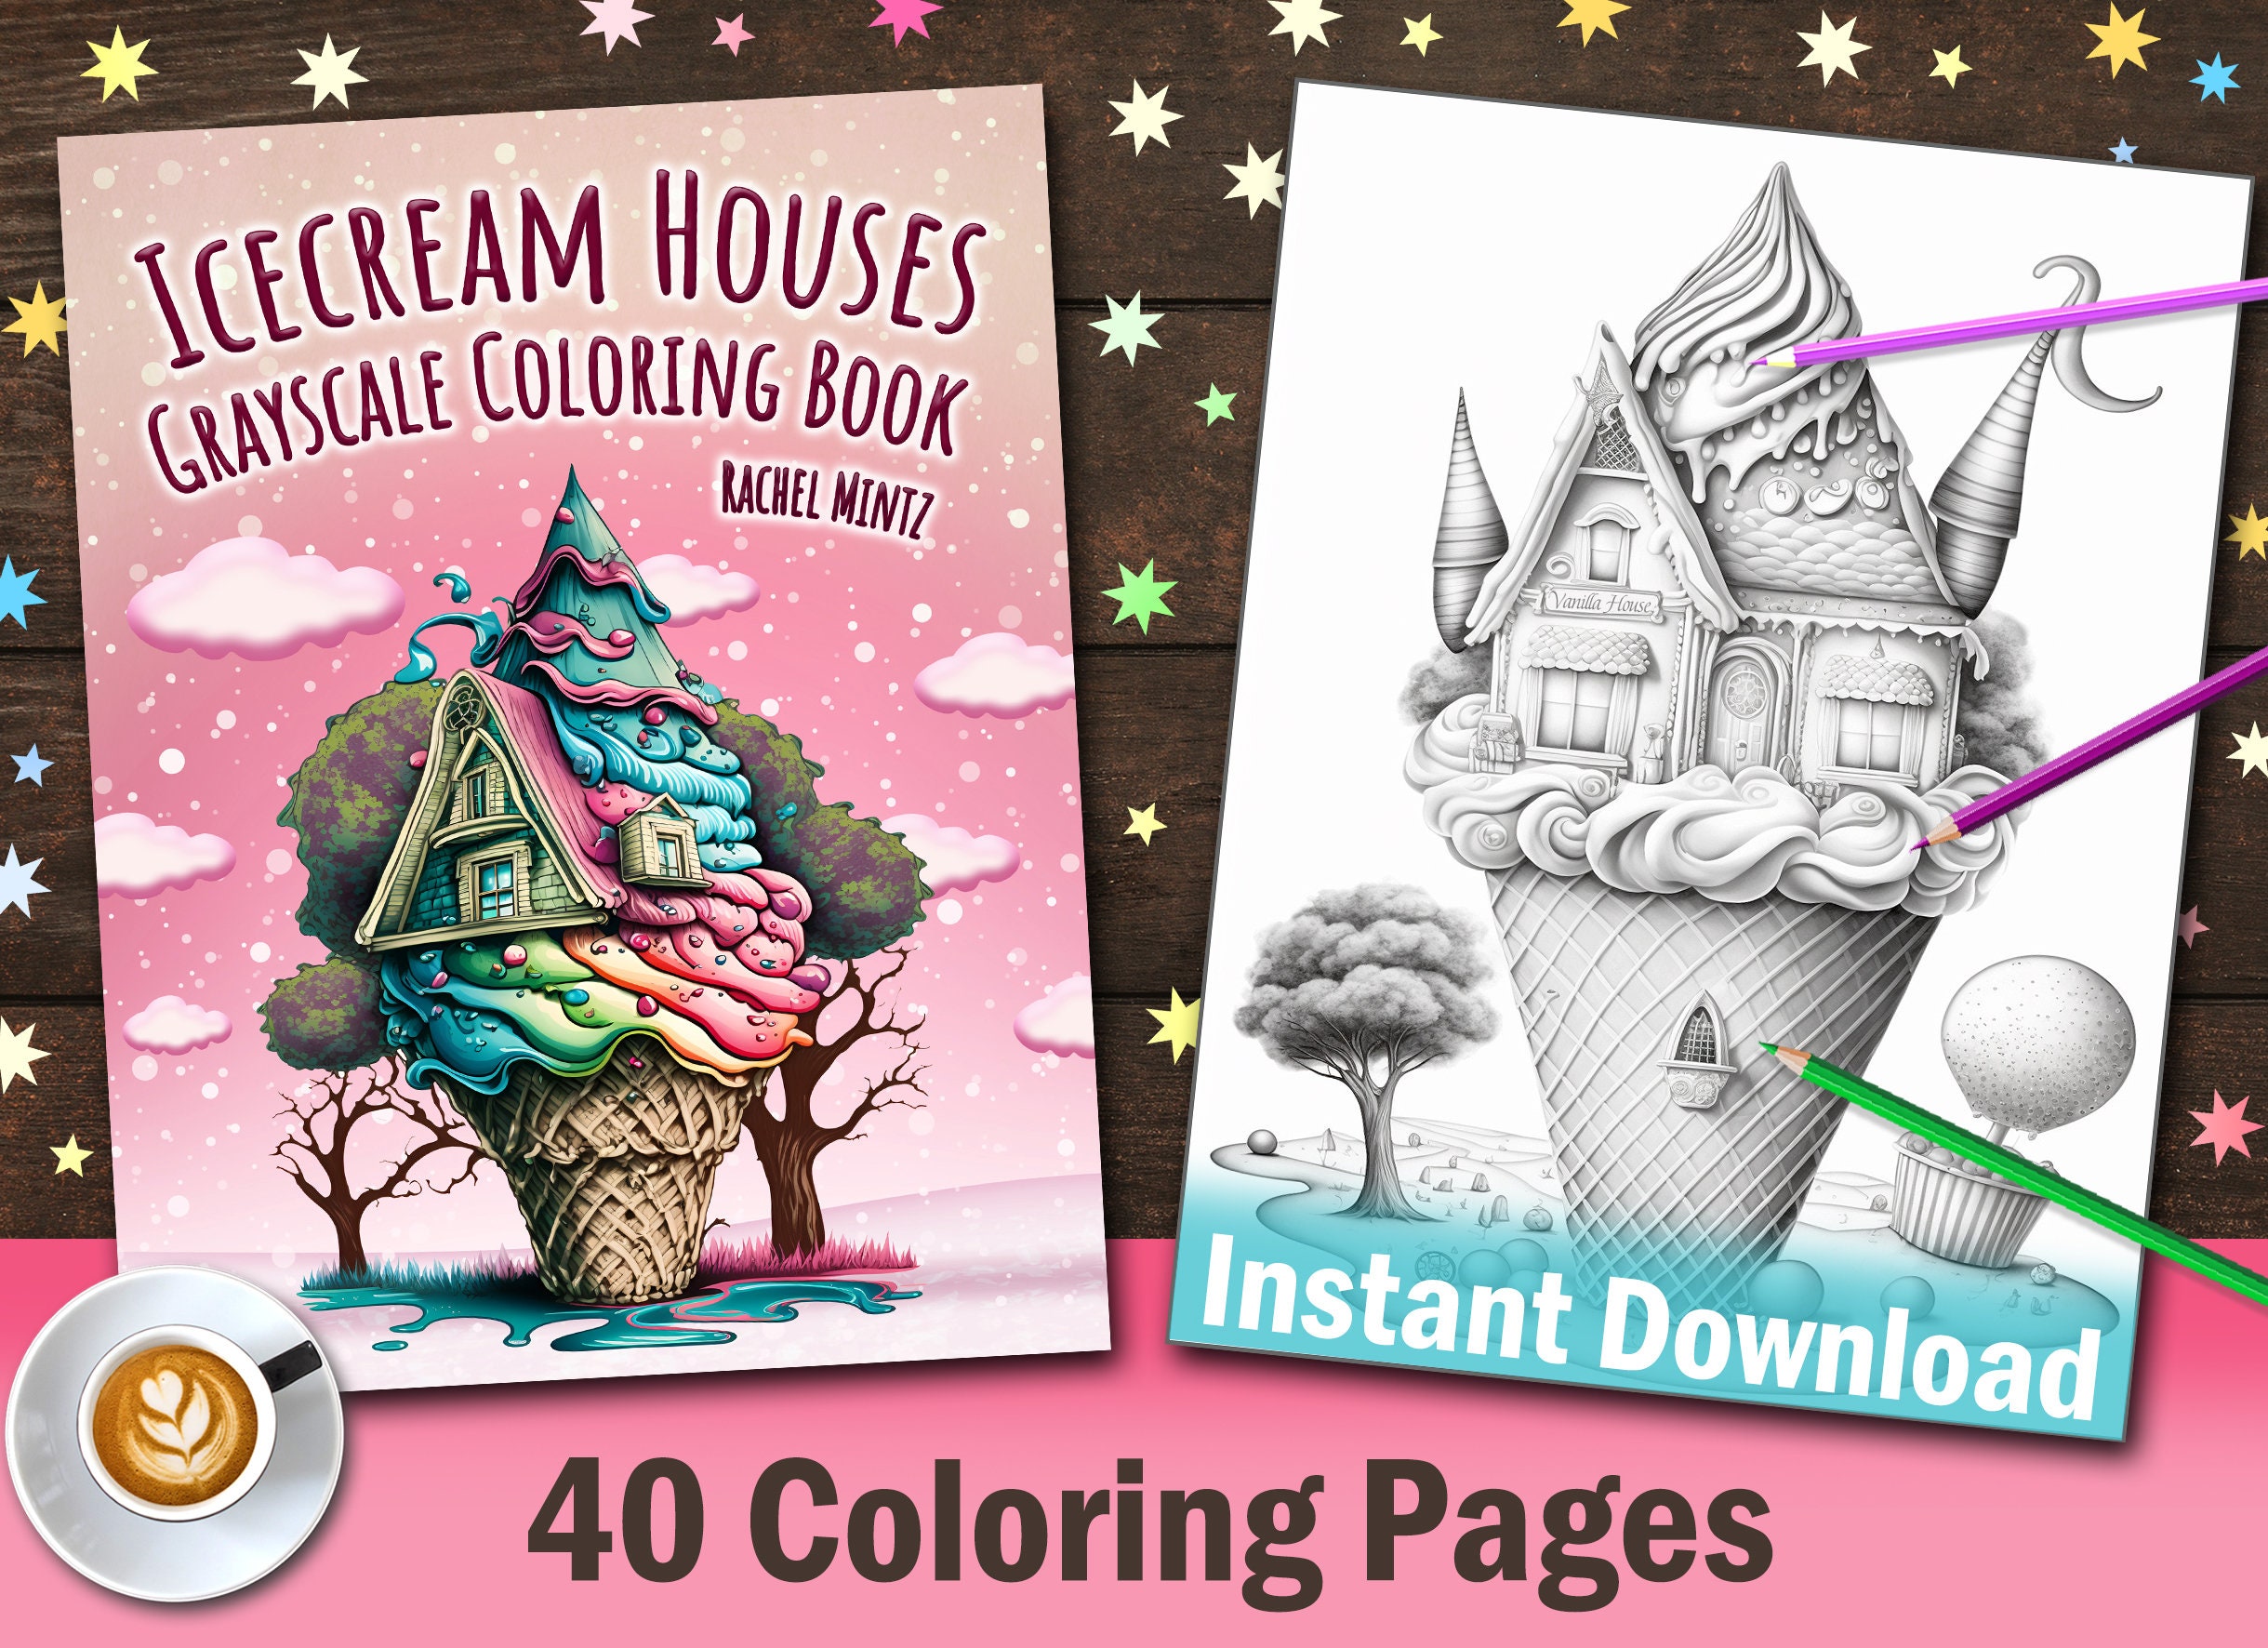 50 Large Print Ornaments Coloring Book For Adults, Easy Christmas Tree –  Rachel Mintz Coloring Books